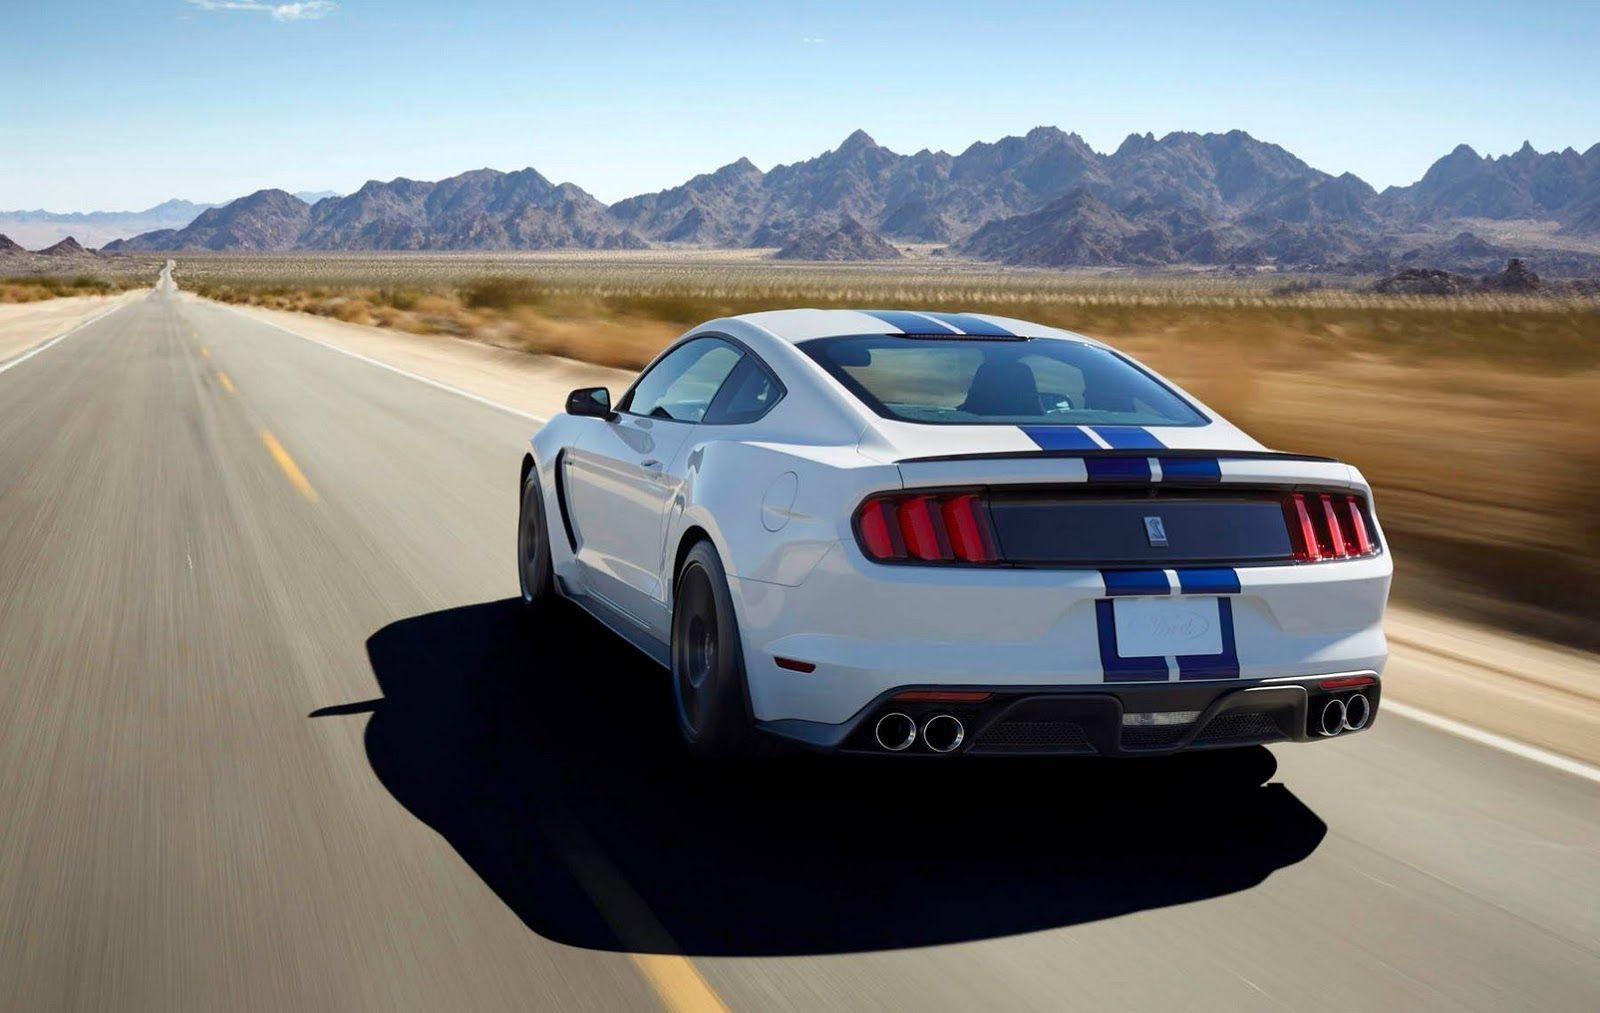 2016 Ford Mustang GT350 Wallpapers Full HD ~ 2016 Cars Wallpapers